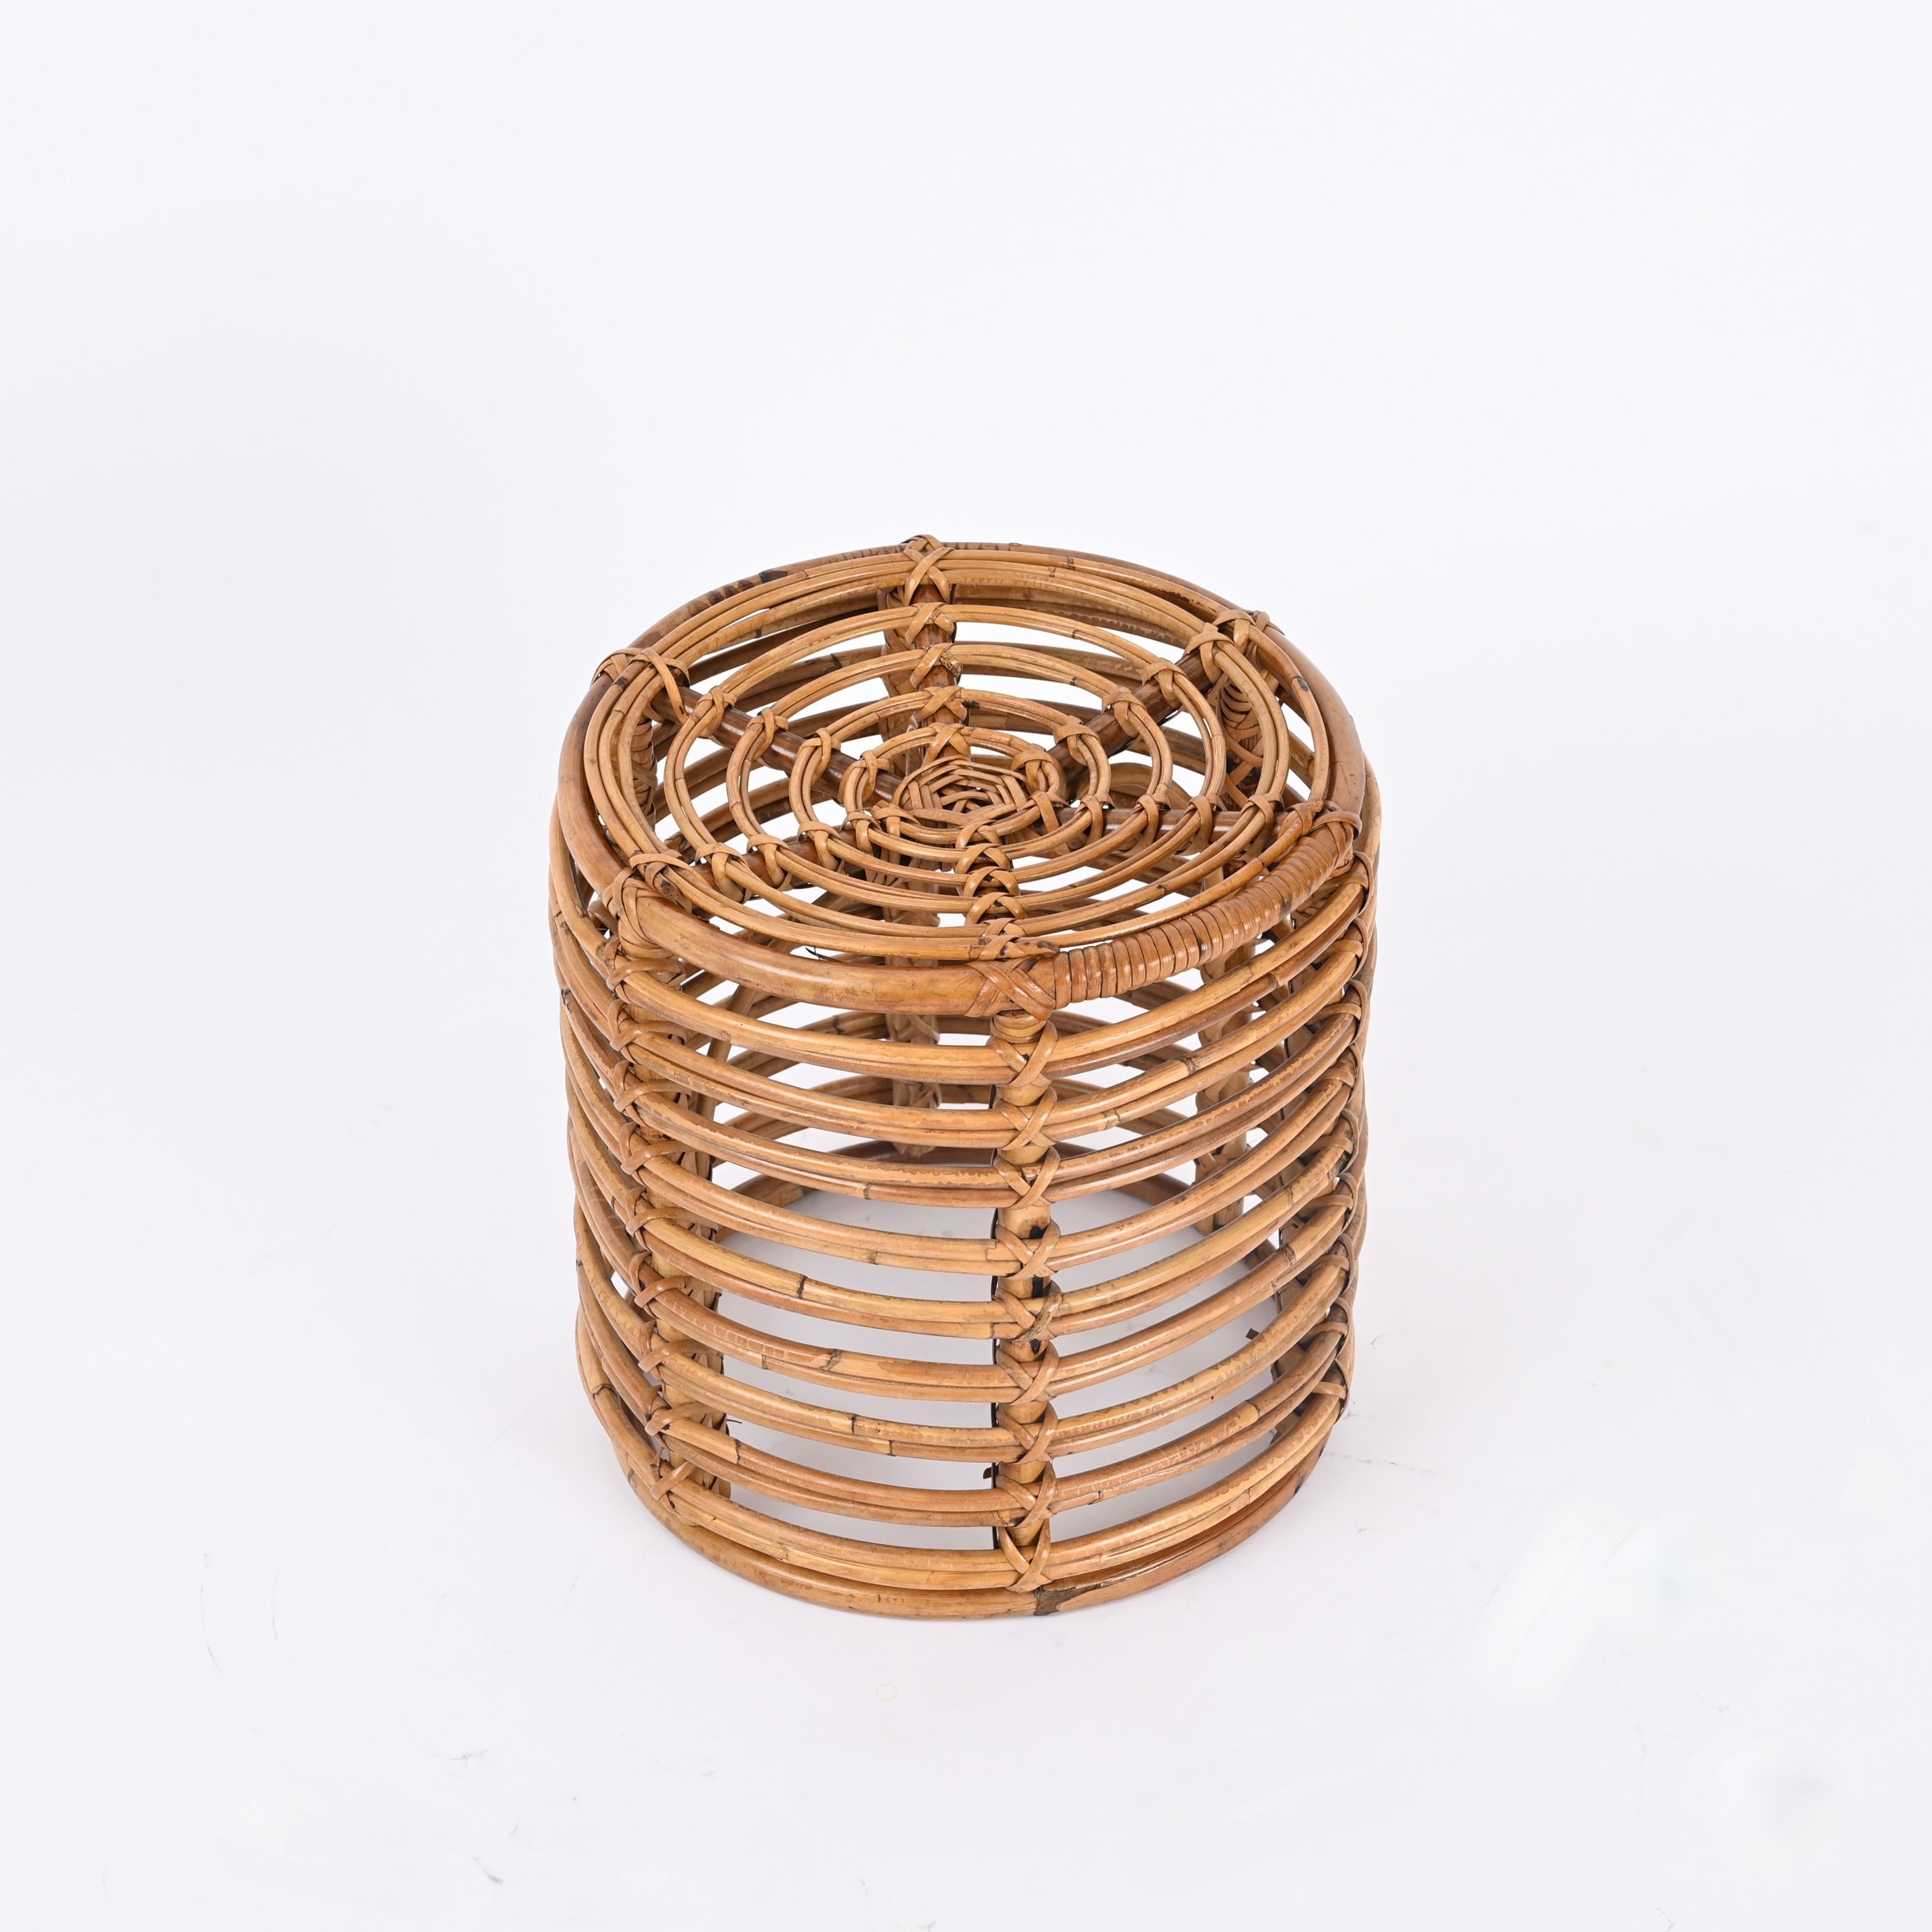 Midcentury Tito Agnoli Rattan and Wicker Round Pouf Stool, Italy, 1970s For Sale 1